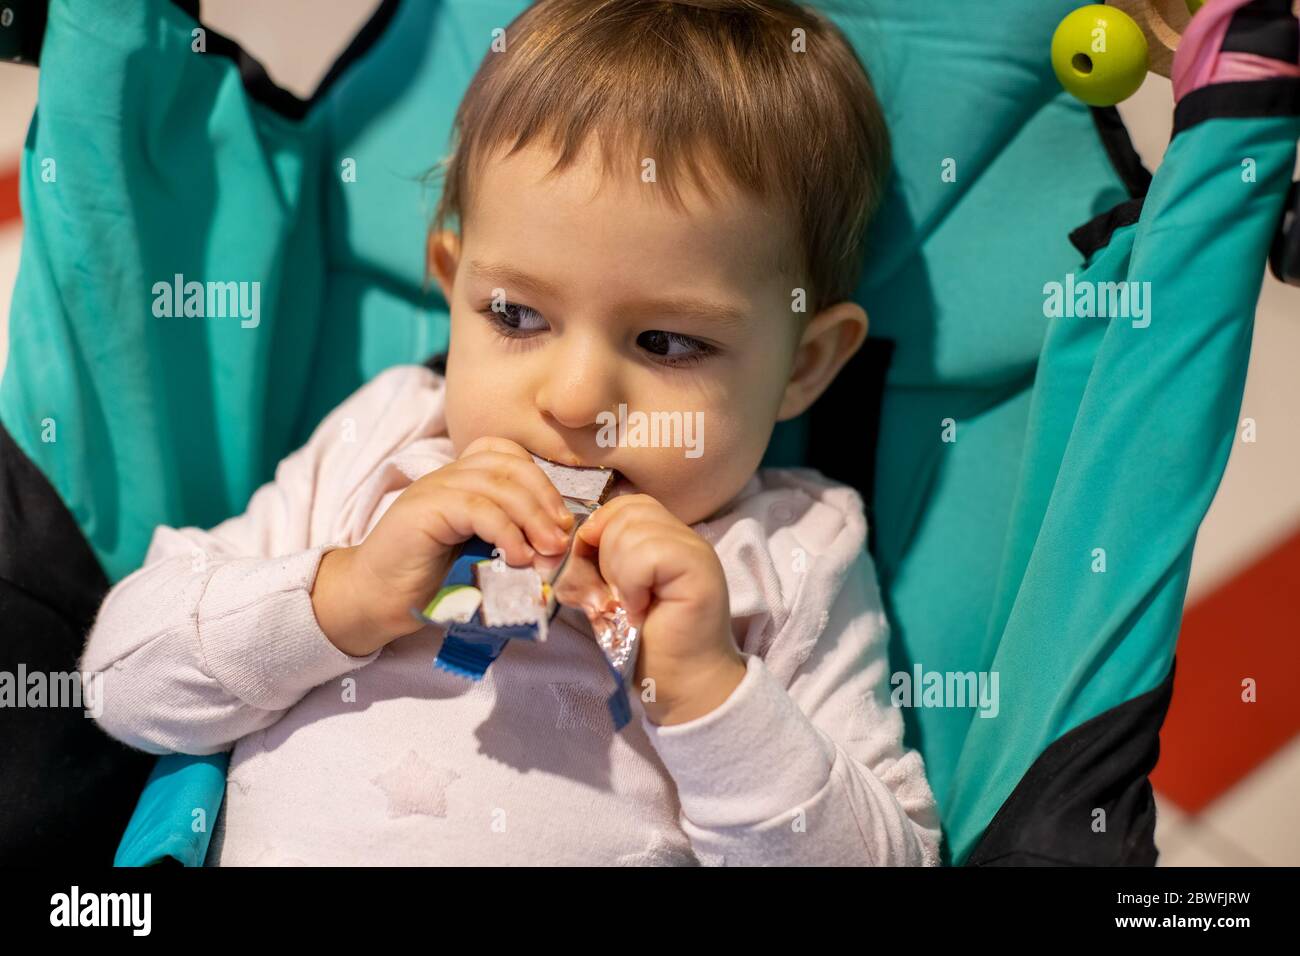 little cute hungry toddler girl sitting in a stroller and eating a lozenge candy bar. close-up, soft focus. Stock Photo